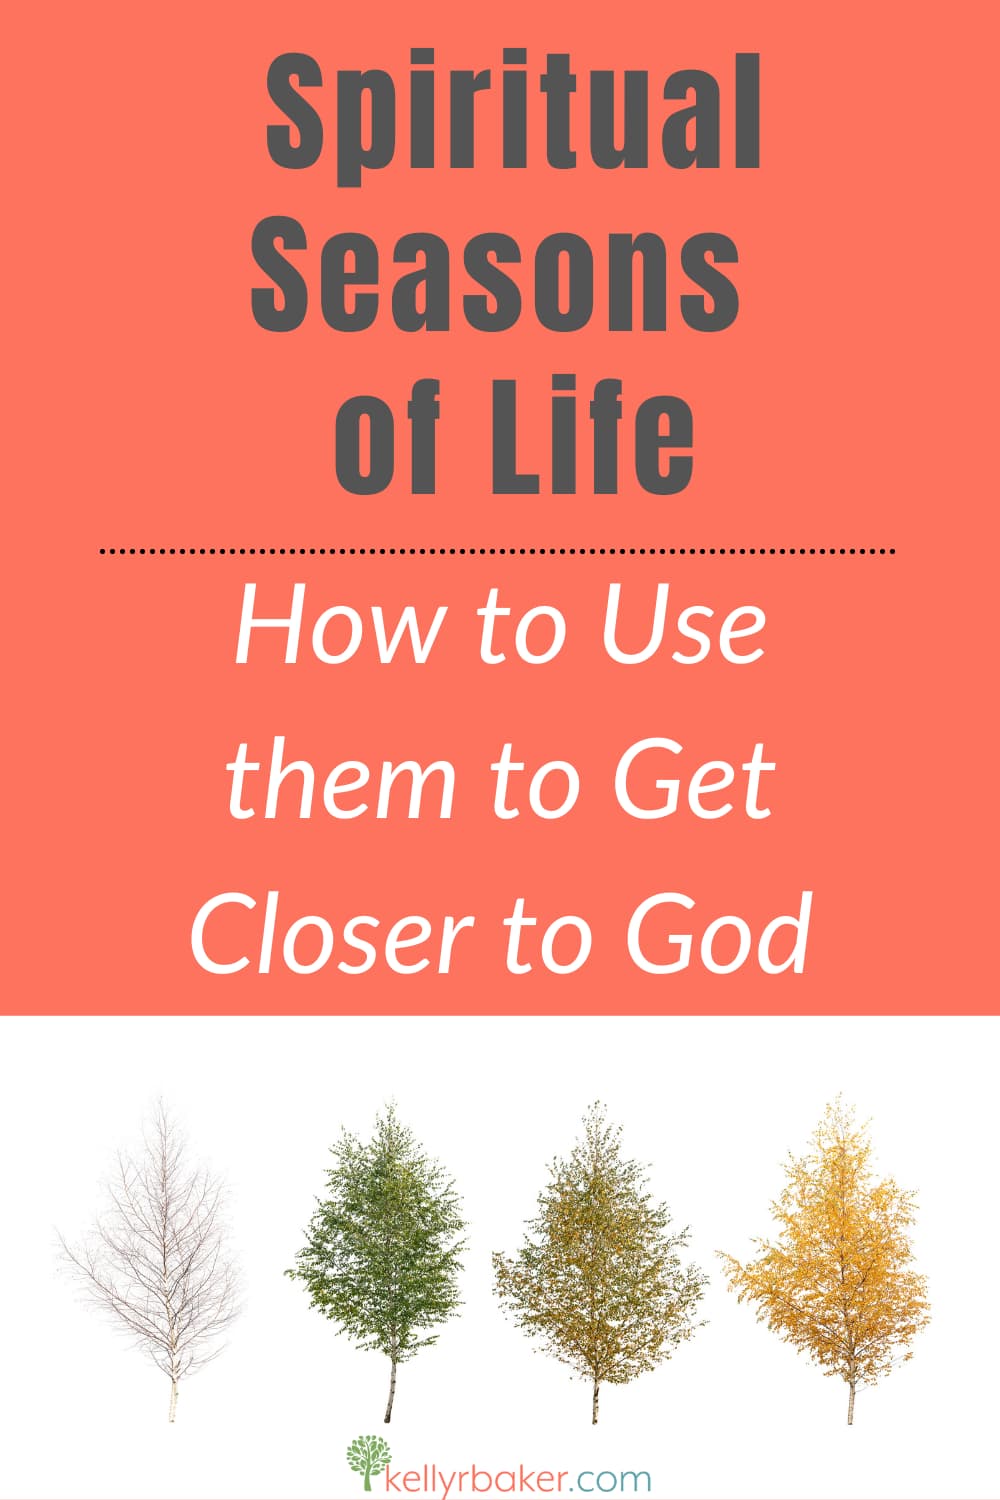 How to Use Spiritual Seasons of Life to Get Closer to God